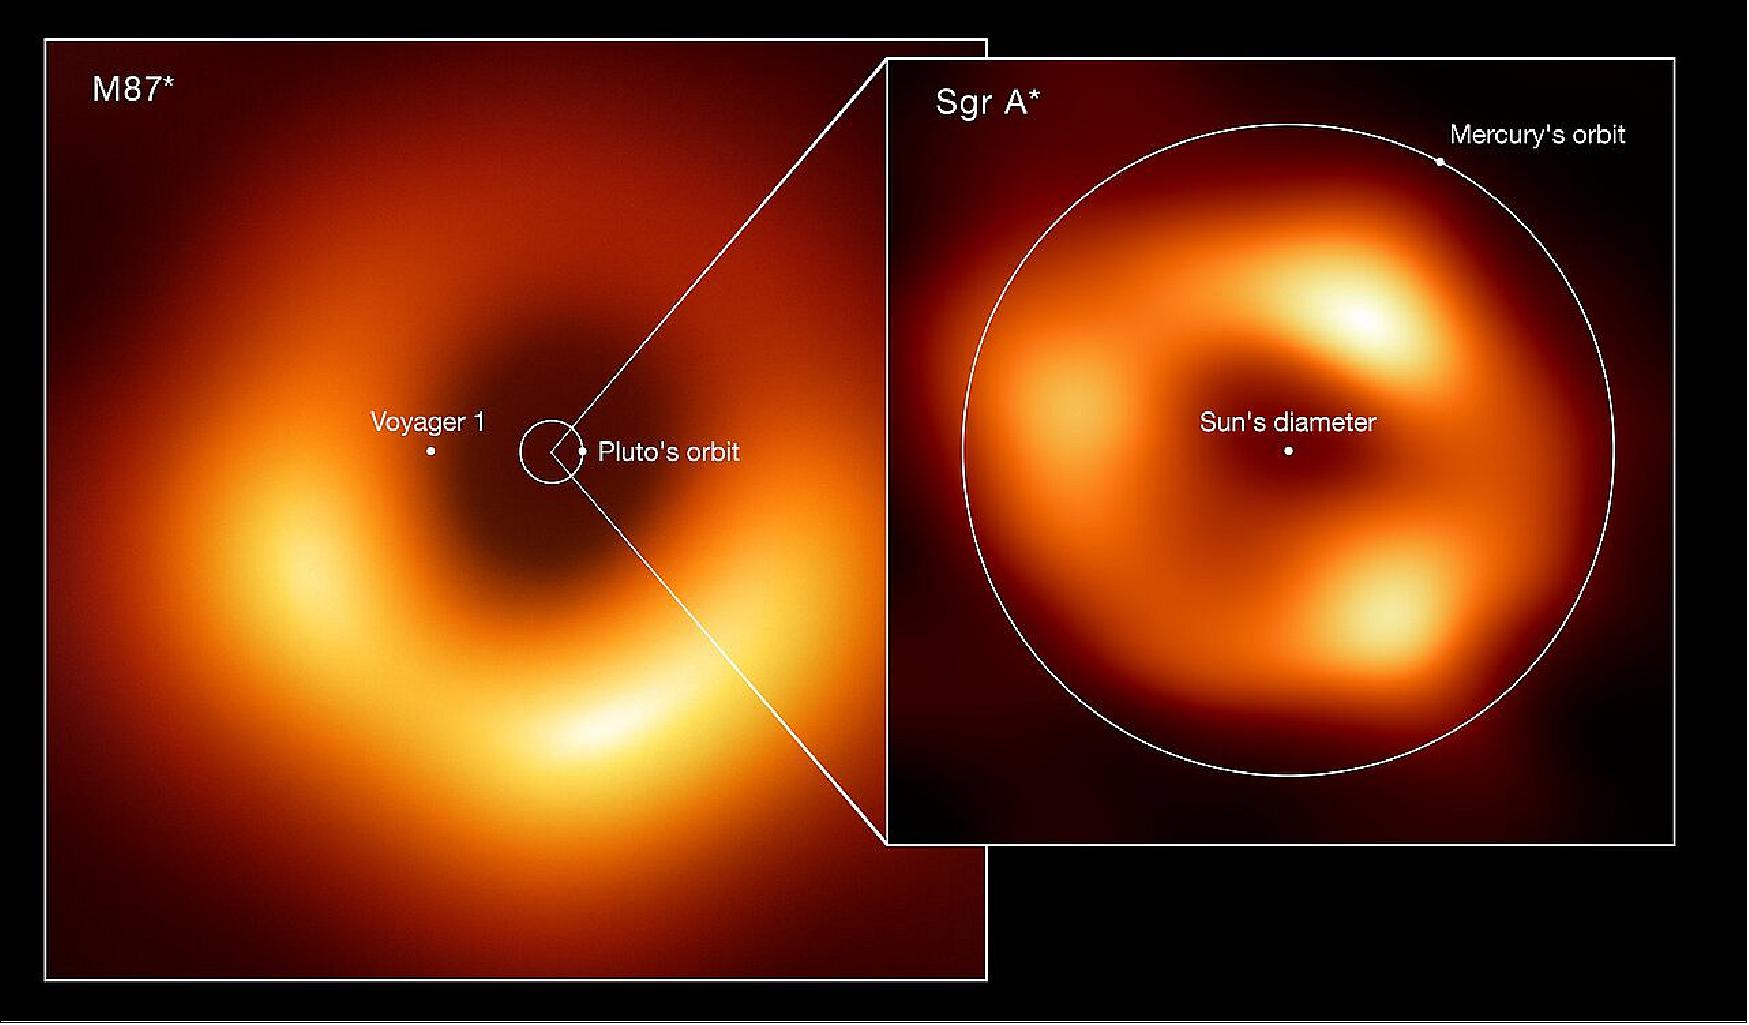 Figure 23: Size comparison of the two black holes imaged by the Event Horizon Telescope (EHT) Collaboration: M87*, at the heart of the galaxy Messier 87, and Sagittarius A* (Sgr A*), at the centre of the Milky Way. The image shows the scale of Sgr A* in comparison with both M87* and other elements of the Solar System such as the orbits of Pluto and Mercury. Also displayed is the Sun’s diameter and the current location of the Voyager 1 space probe, the furthest spacecraft from Earth. M87*, which lies 55 million light-years away, is one of the largest black holes known. While Sgr A*, 27 000 light-years away, has a mass roughly four million times the Sun’s mass, M87* is more than 1000 times more massive. Because of their relative distances from Earth, both black holes appear the same size in the sky. [image credit: EHT collaboration (acknowledgment: Lia Medeiros, xkcd)] 36)